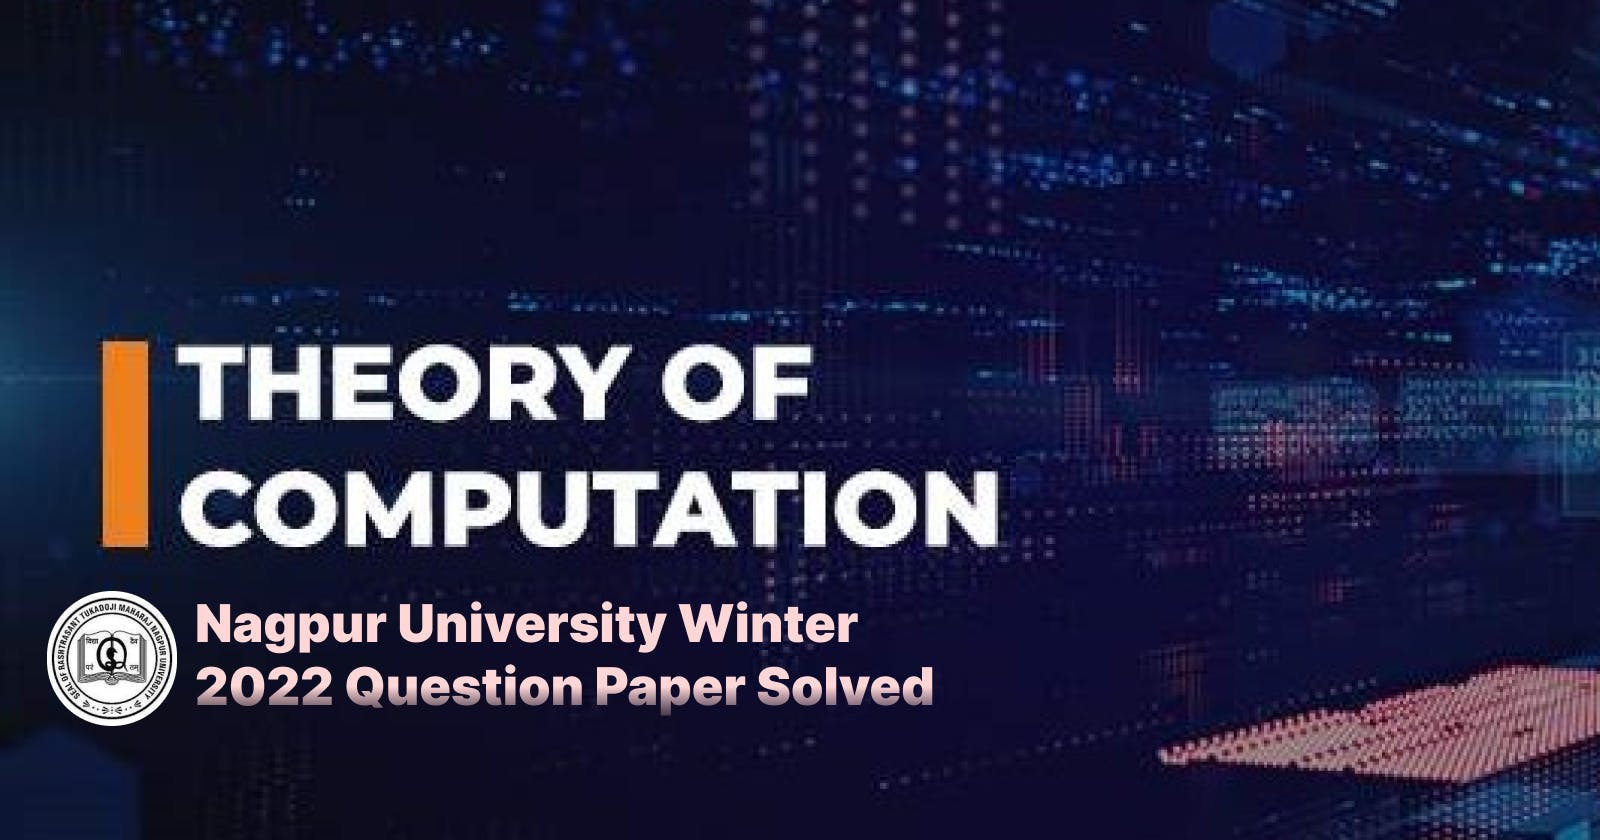 Theory of Computation Nagpur University Winter 2022 Question Paper Solved